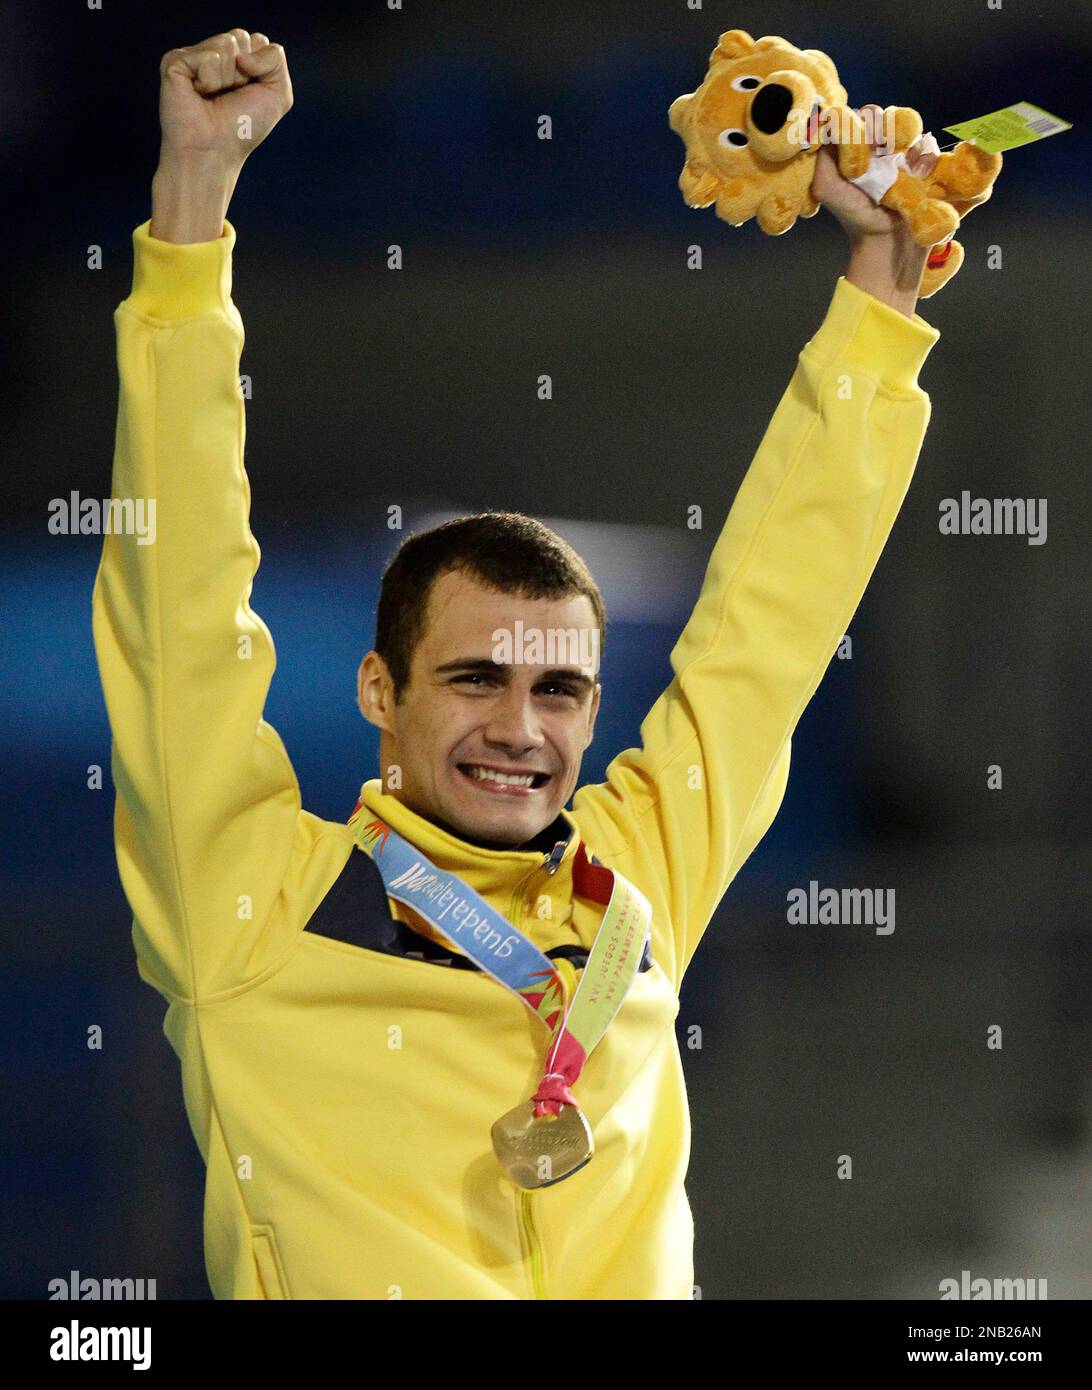 Brazil's Leonardo De Deus reacts after being awarded the gold medal for winning the men's 200m butterfly at the Pan American Games in Guadalajara, Mexico, Monday, Oct. 17, 2011. De Deus was initially disqualified, because of the sponsor’s logo on his swim cap according to Brazilian officials , and then reinstated as the gold medalist after an appeal. (AP Photo/Julie Jacobson) Stock Photo